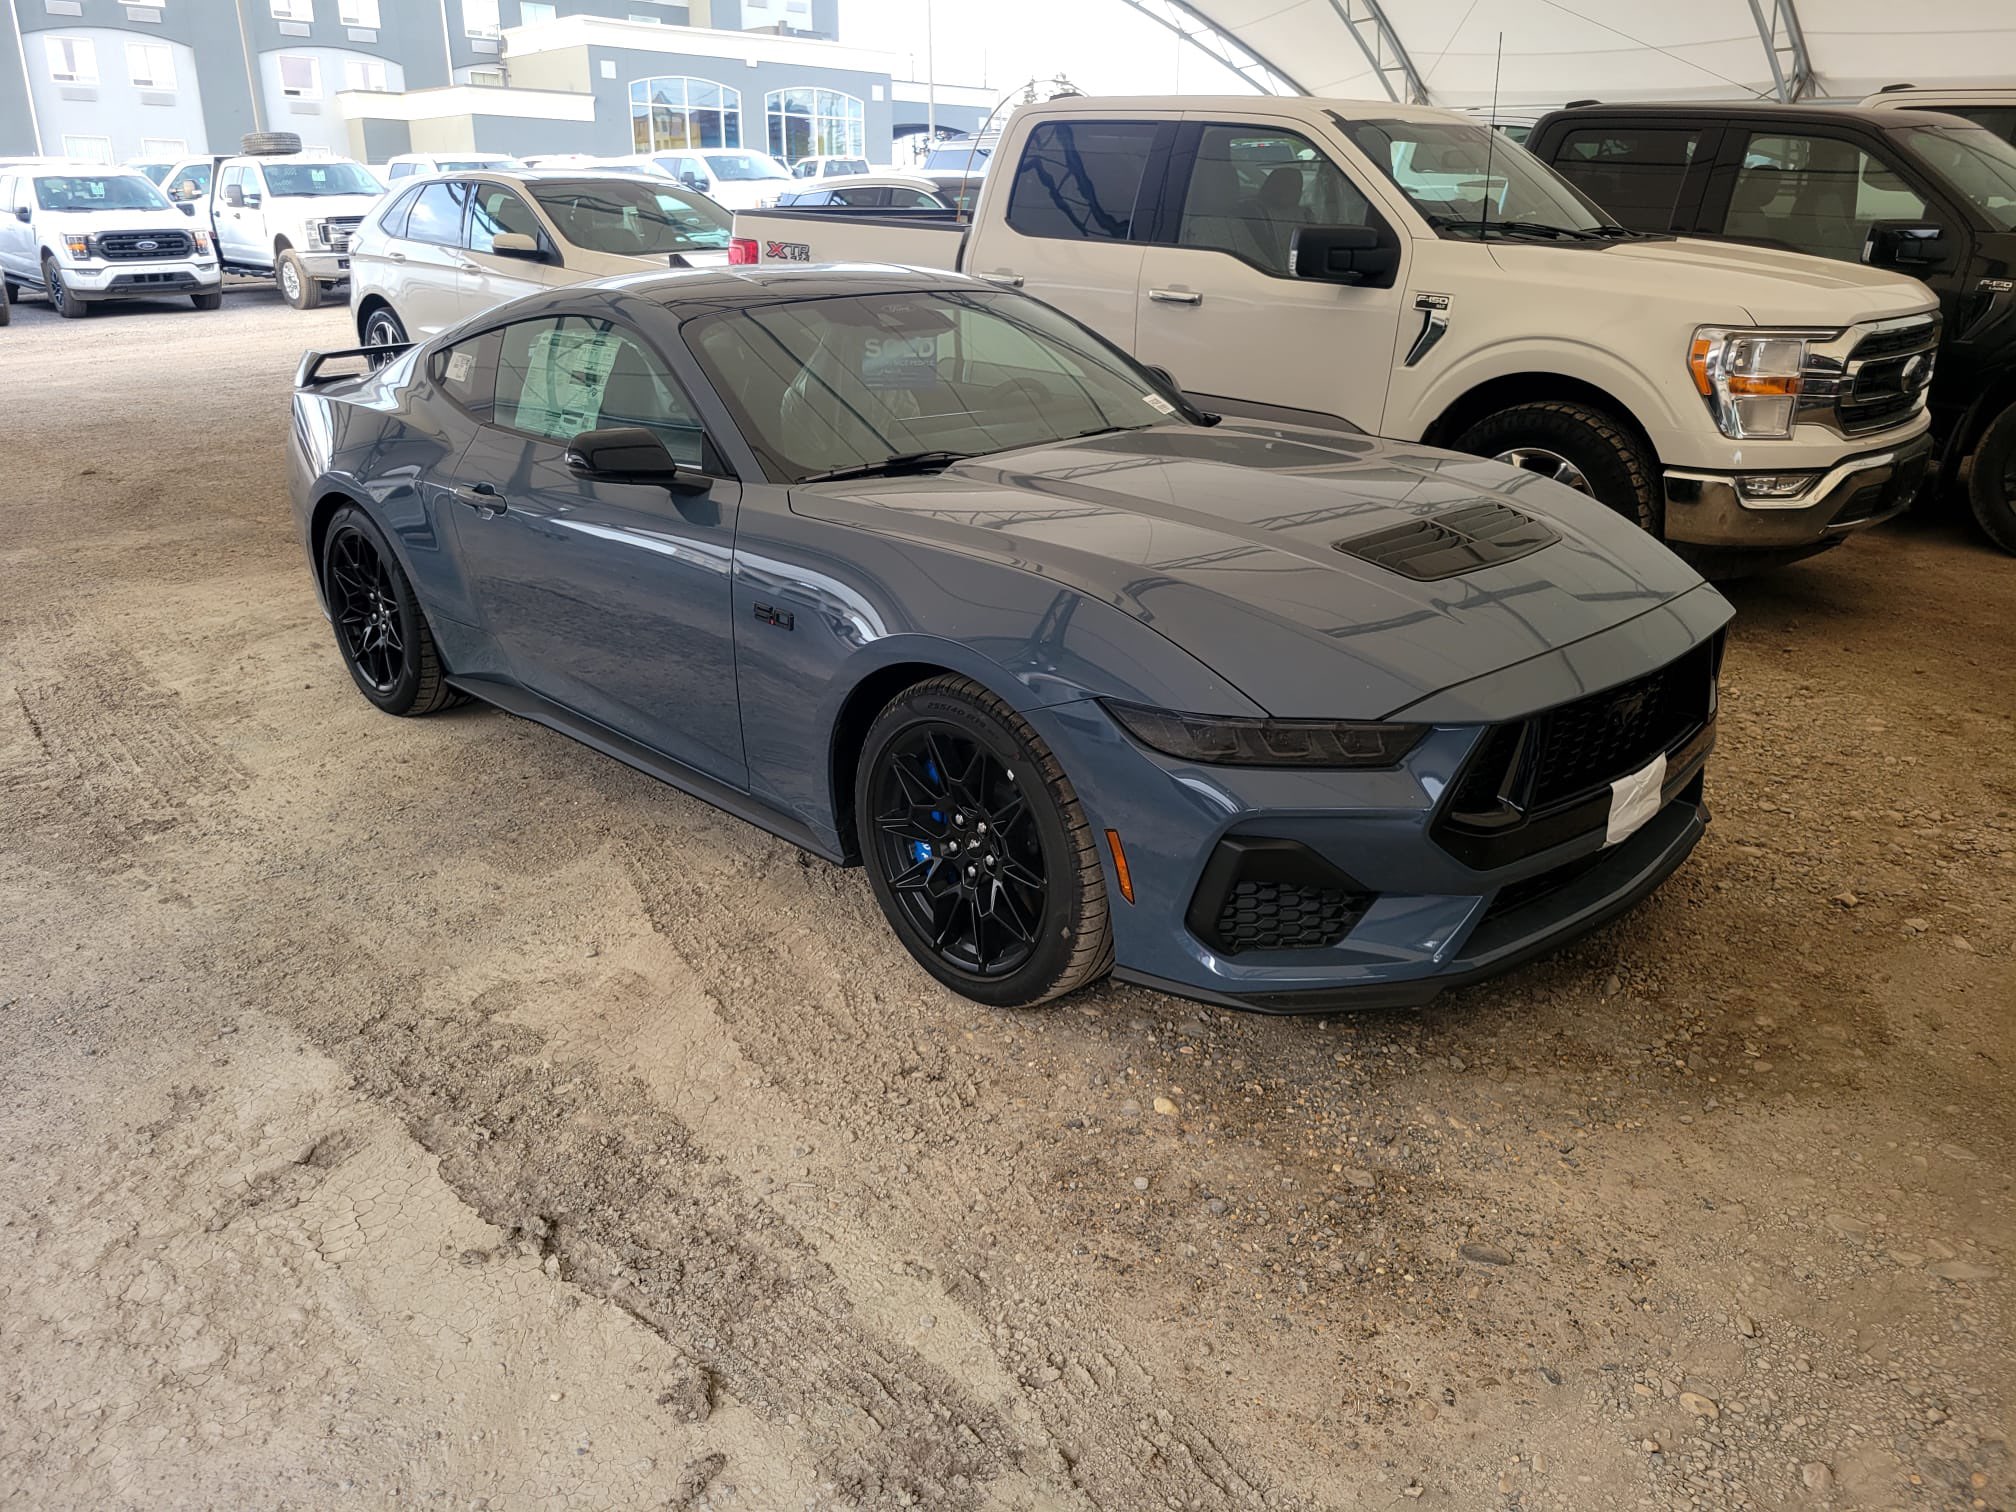 S650 Mustang Finally Delivered Today (Pics) car